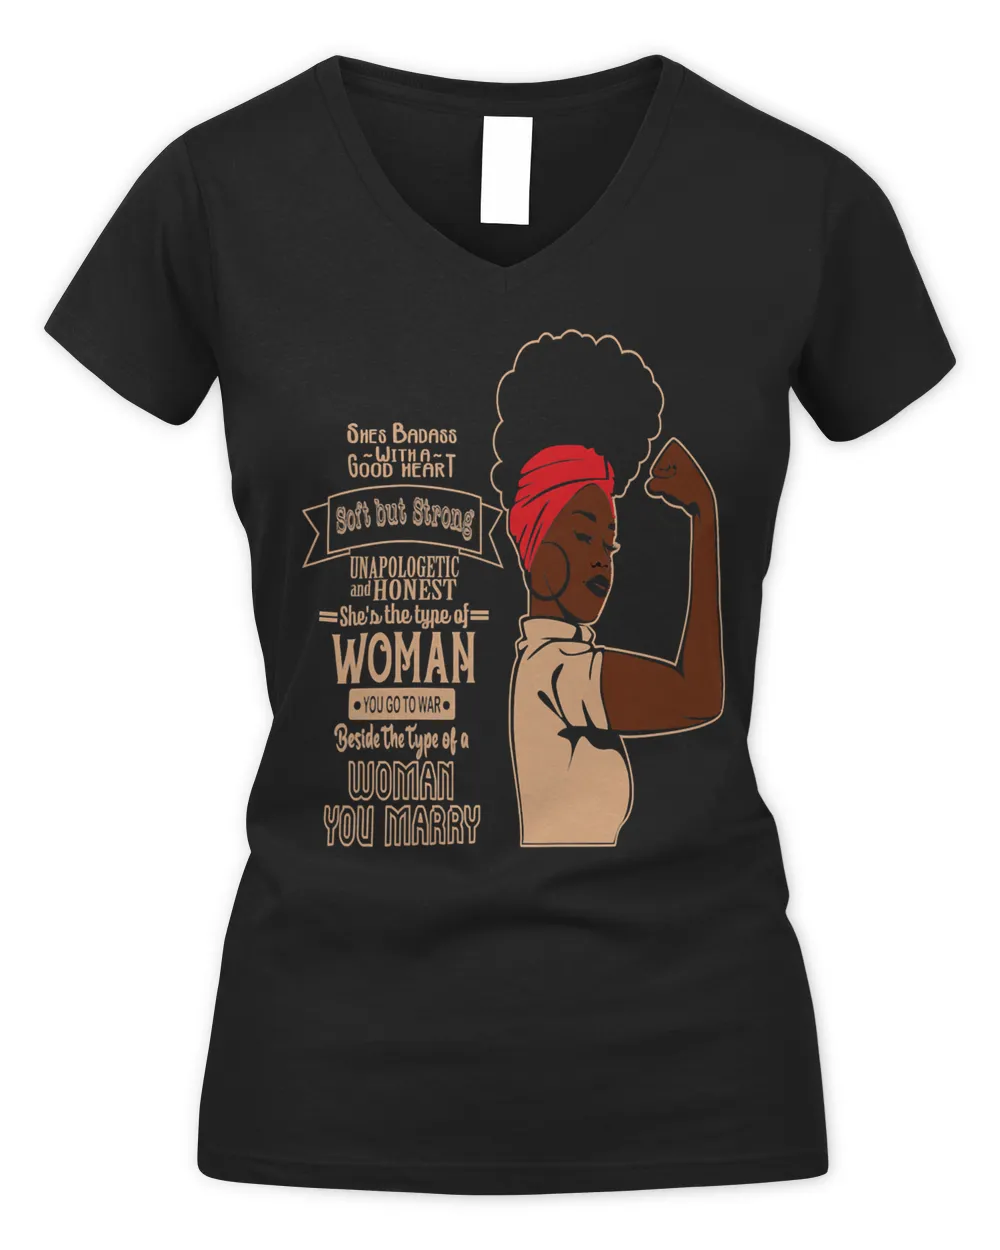 Womens Unapologetic Afro Woman Black History Month BLM Melanin T-Shirt